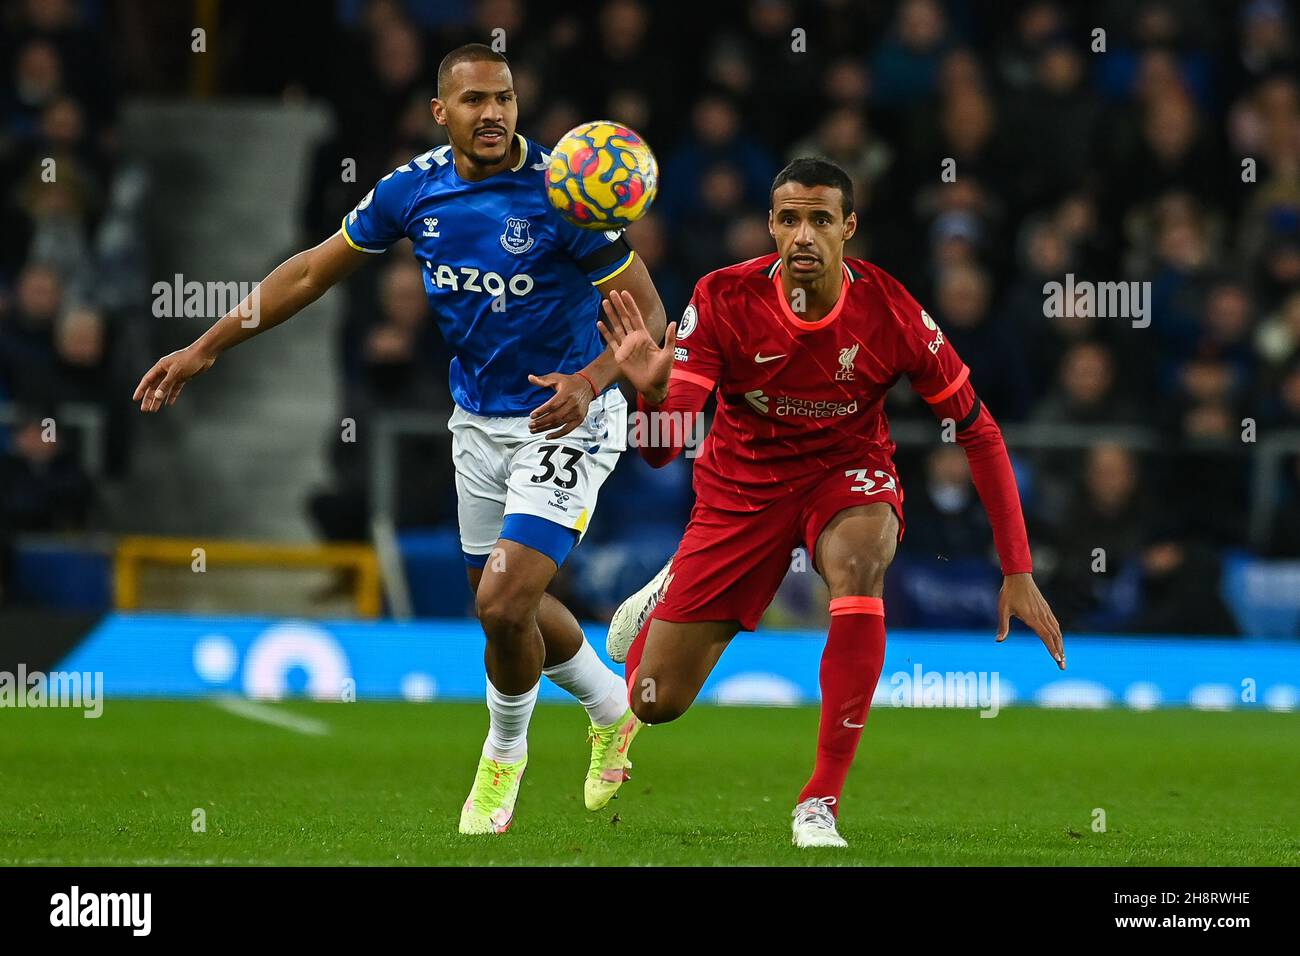 Joel Matip #32 of Liverpool and Jose Salomon Rondon #33 of Everton battles for the ball in, on 12/1/2021. (Photo by Craig Thomas/News Images/Sipa USA) Credit: Sipa USA/Alamy Live News Stock Photo